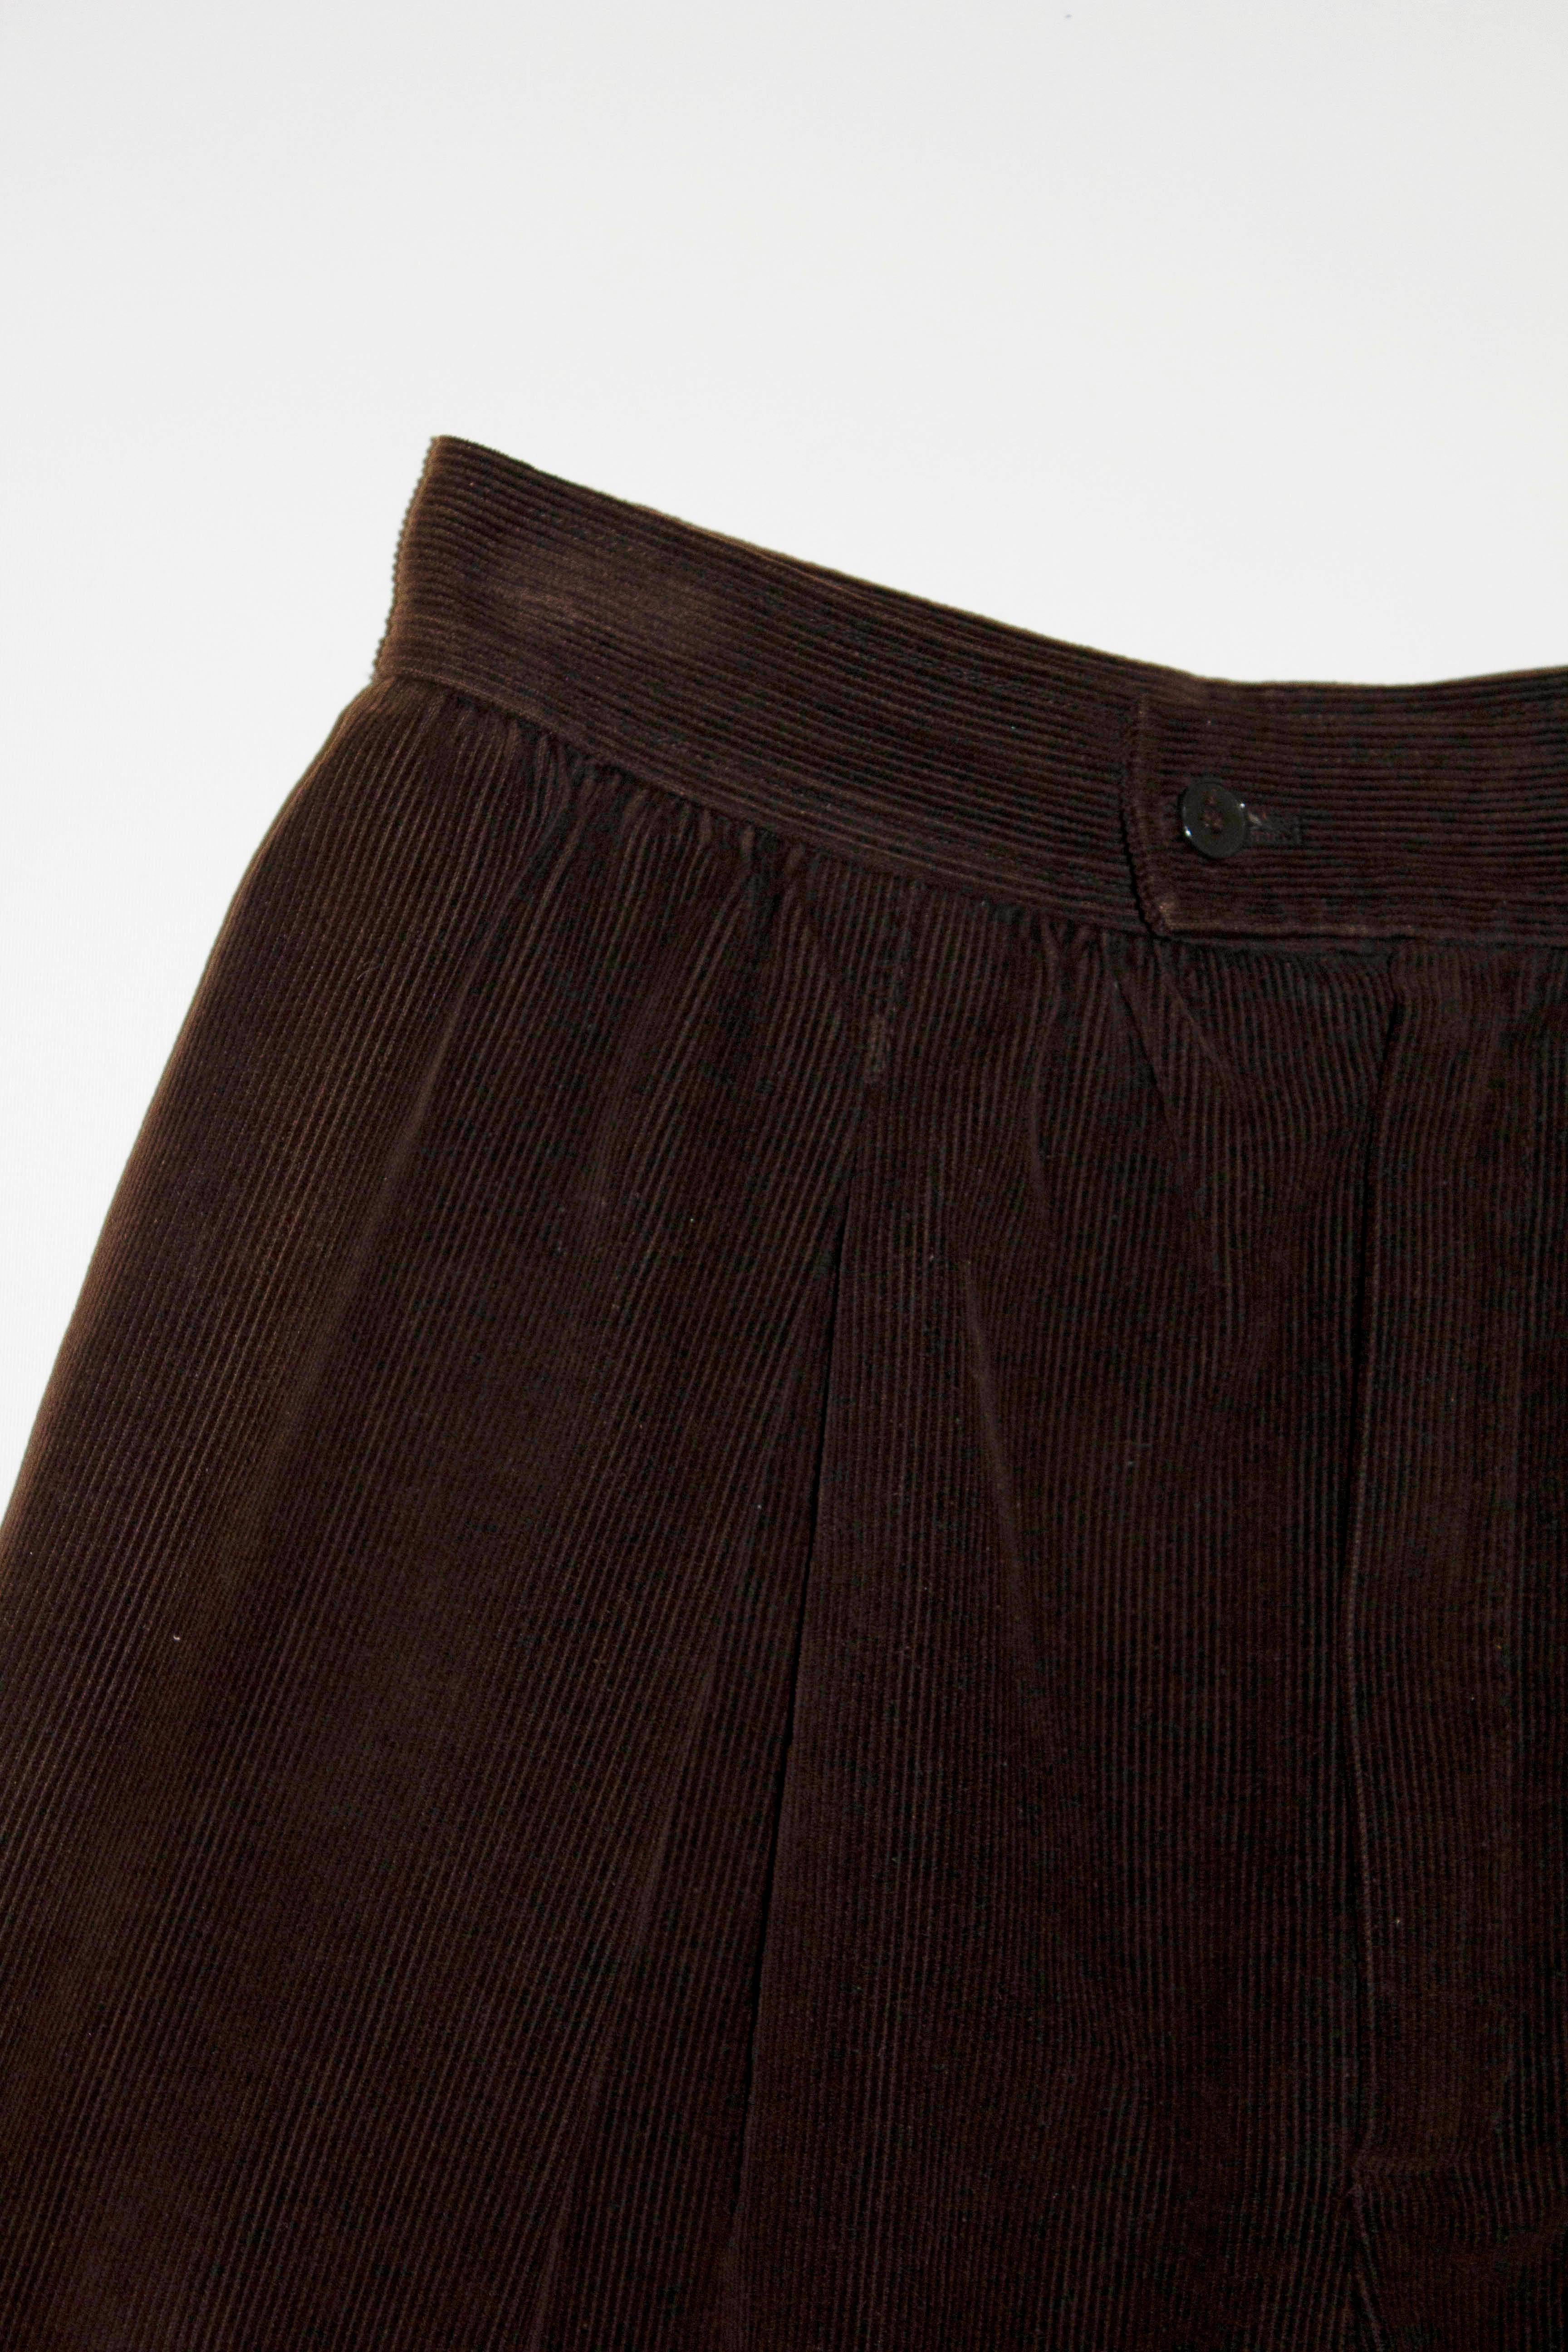 A chic pair of shorts by Yves Saint Laurent. In an nice shade of brown , the shorts have a pocket on either side .
They are unlined. Size 38 Waist 26'' plus and extra 2'', length 21''' plus 2 1/2'' hem.